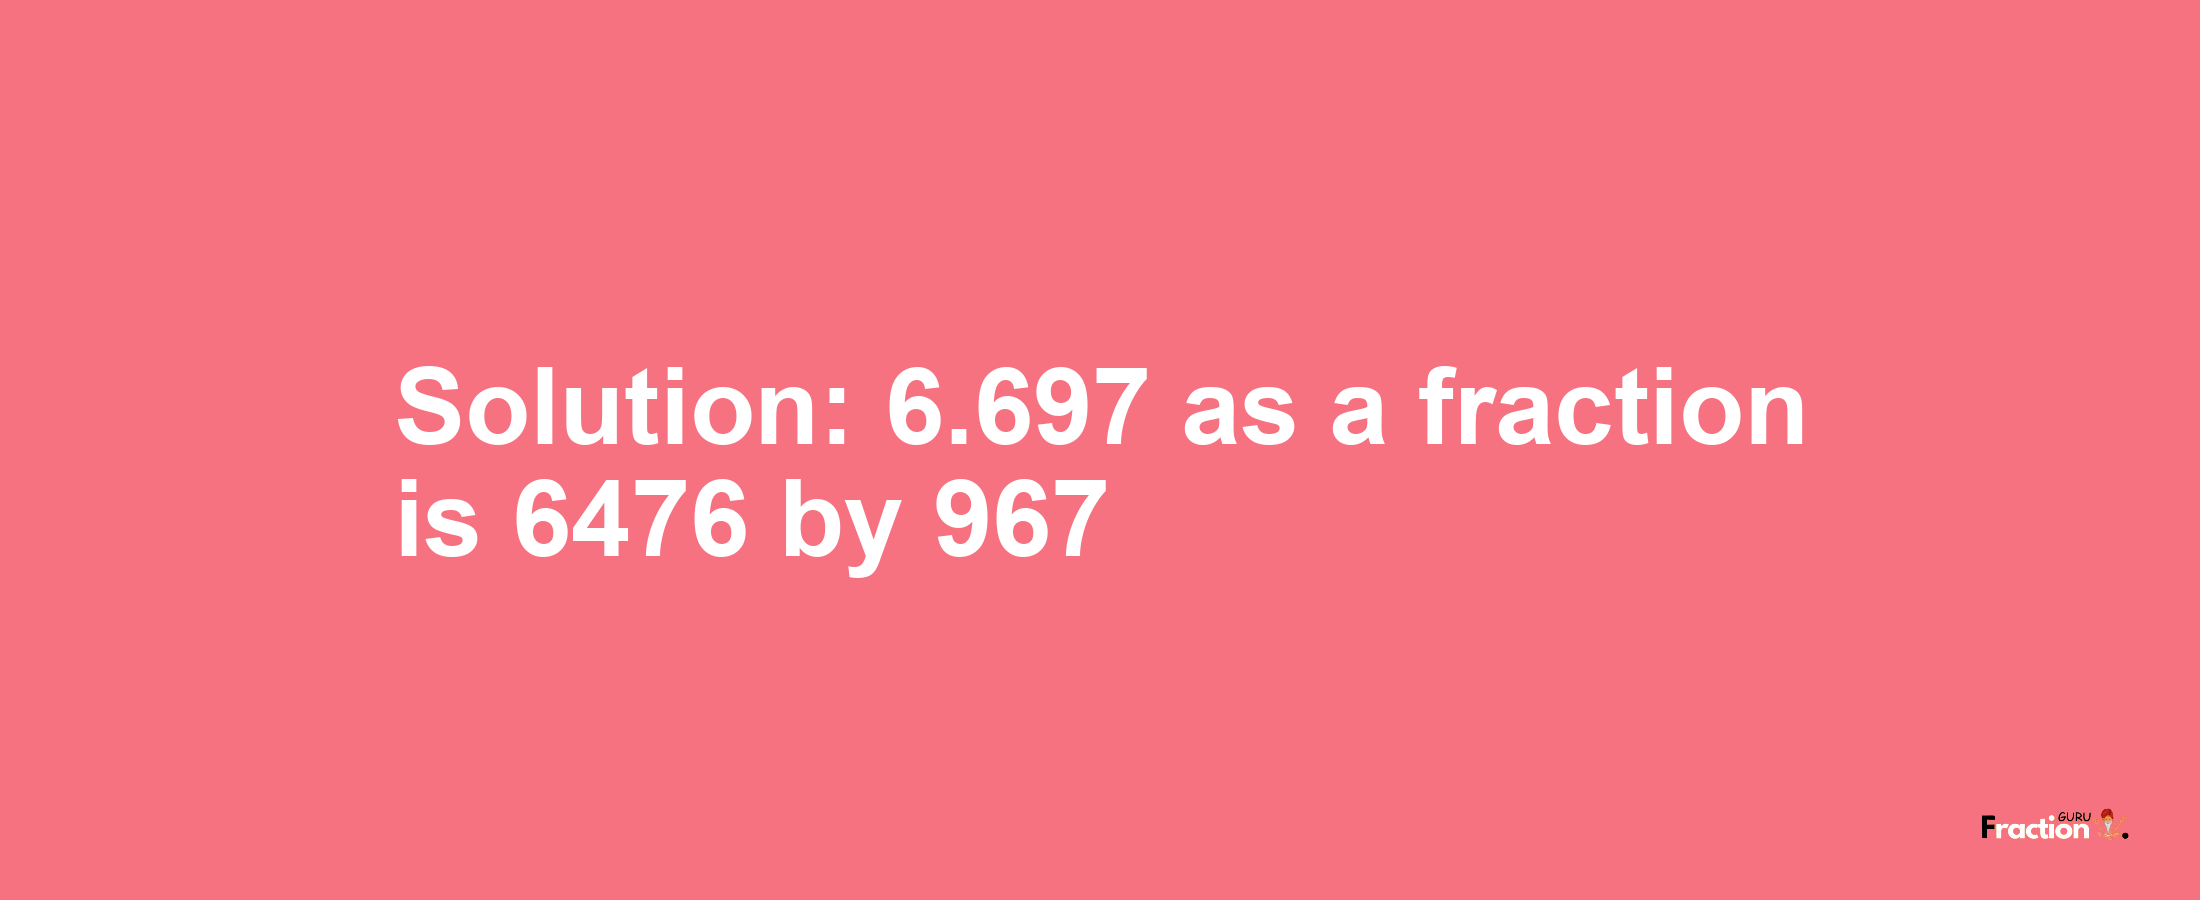 Solution:6.697 as a fraction is 6476/967